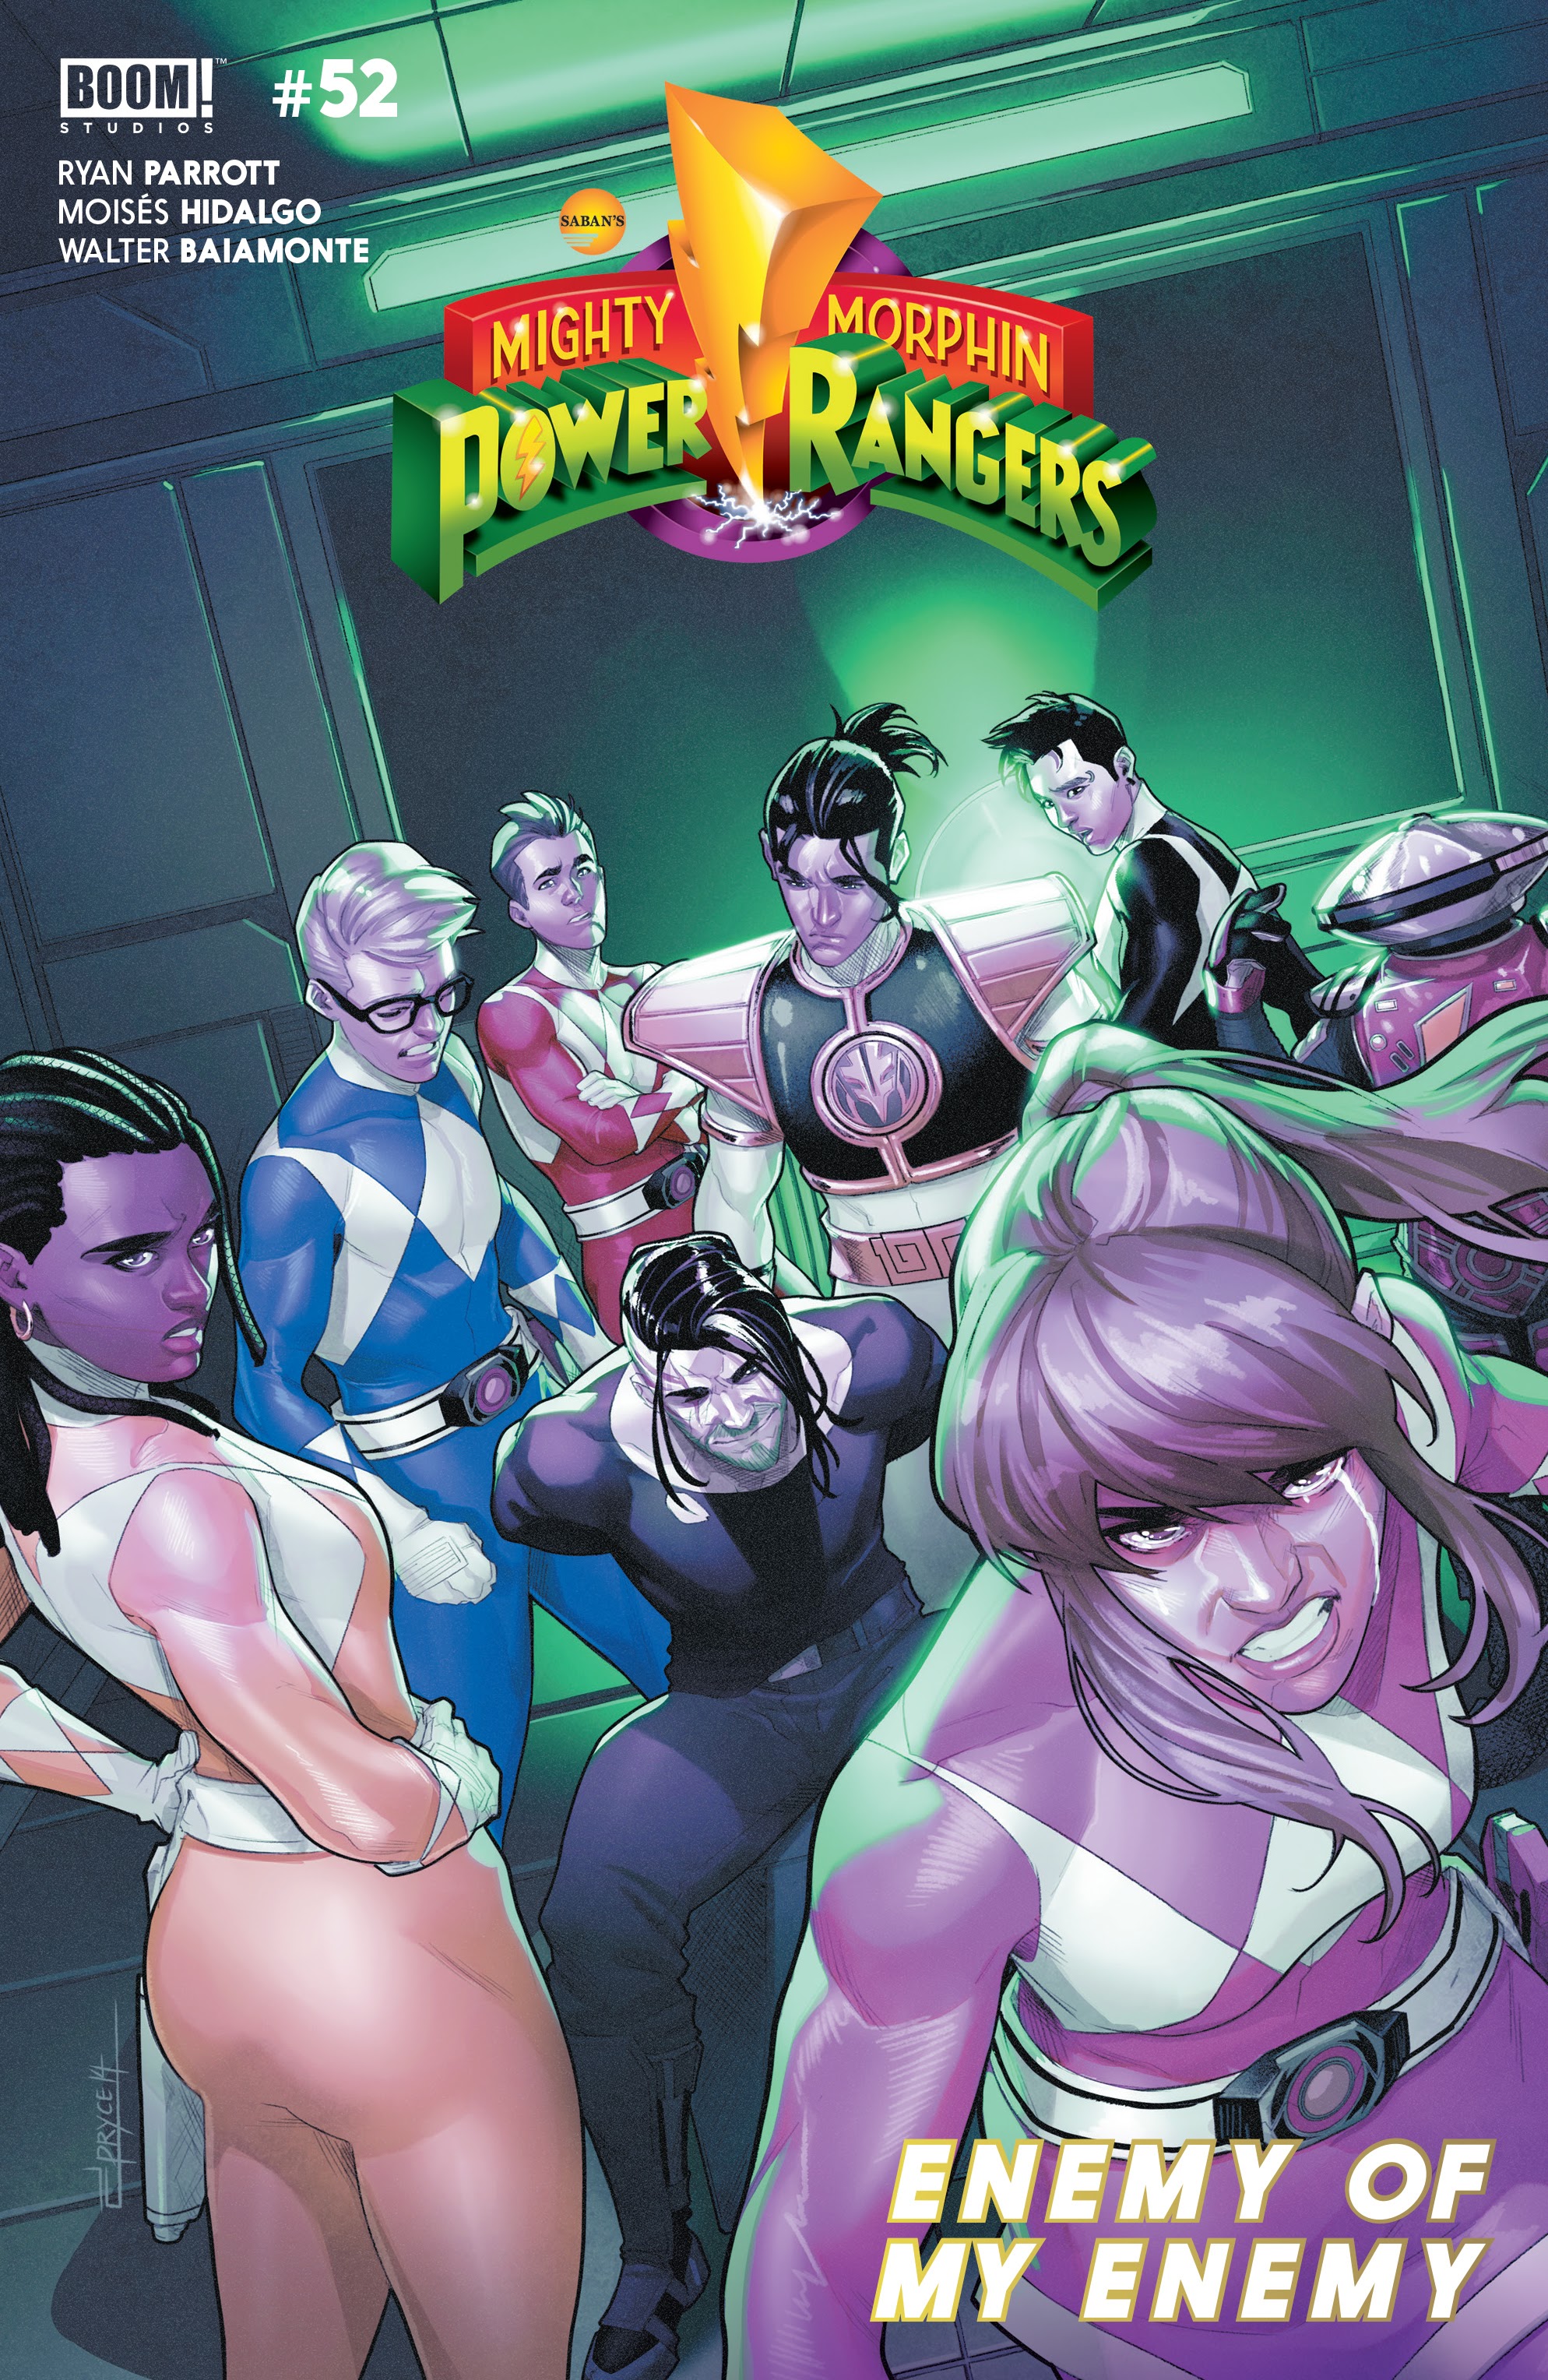 Mighty Morphin Power Rangers Issue 52 | Read Mighty Morphin Power Rangers  Issue 52 comic online in high quality. Read Full Comic online for free -  Read comics online in high quality .|viewcomiconline.com